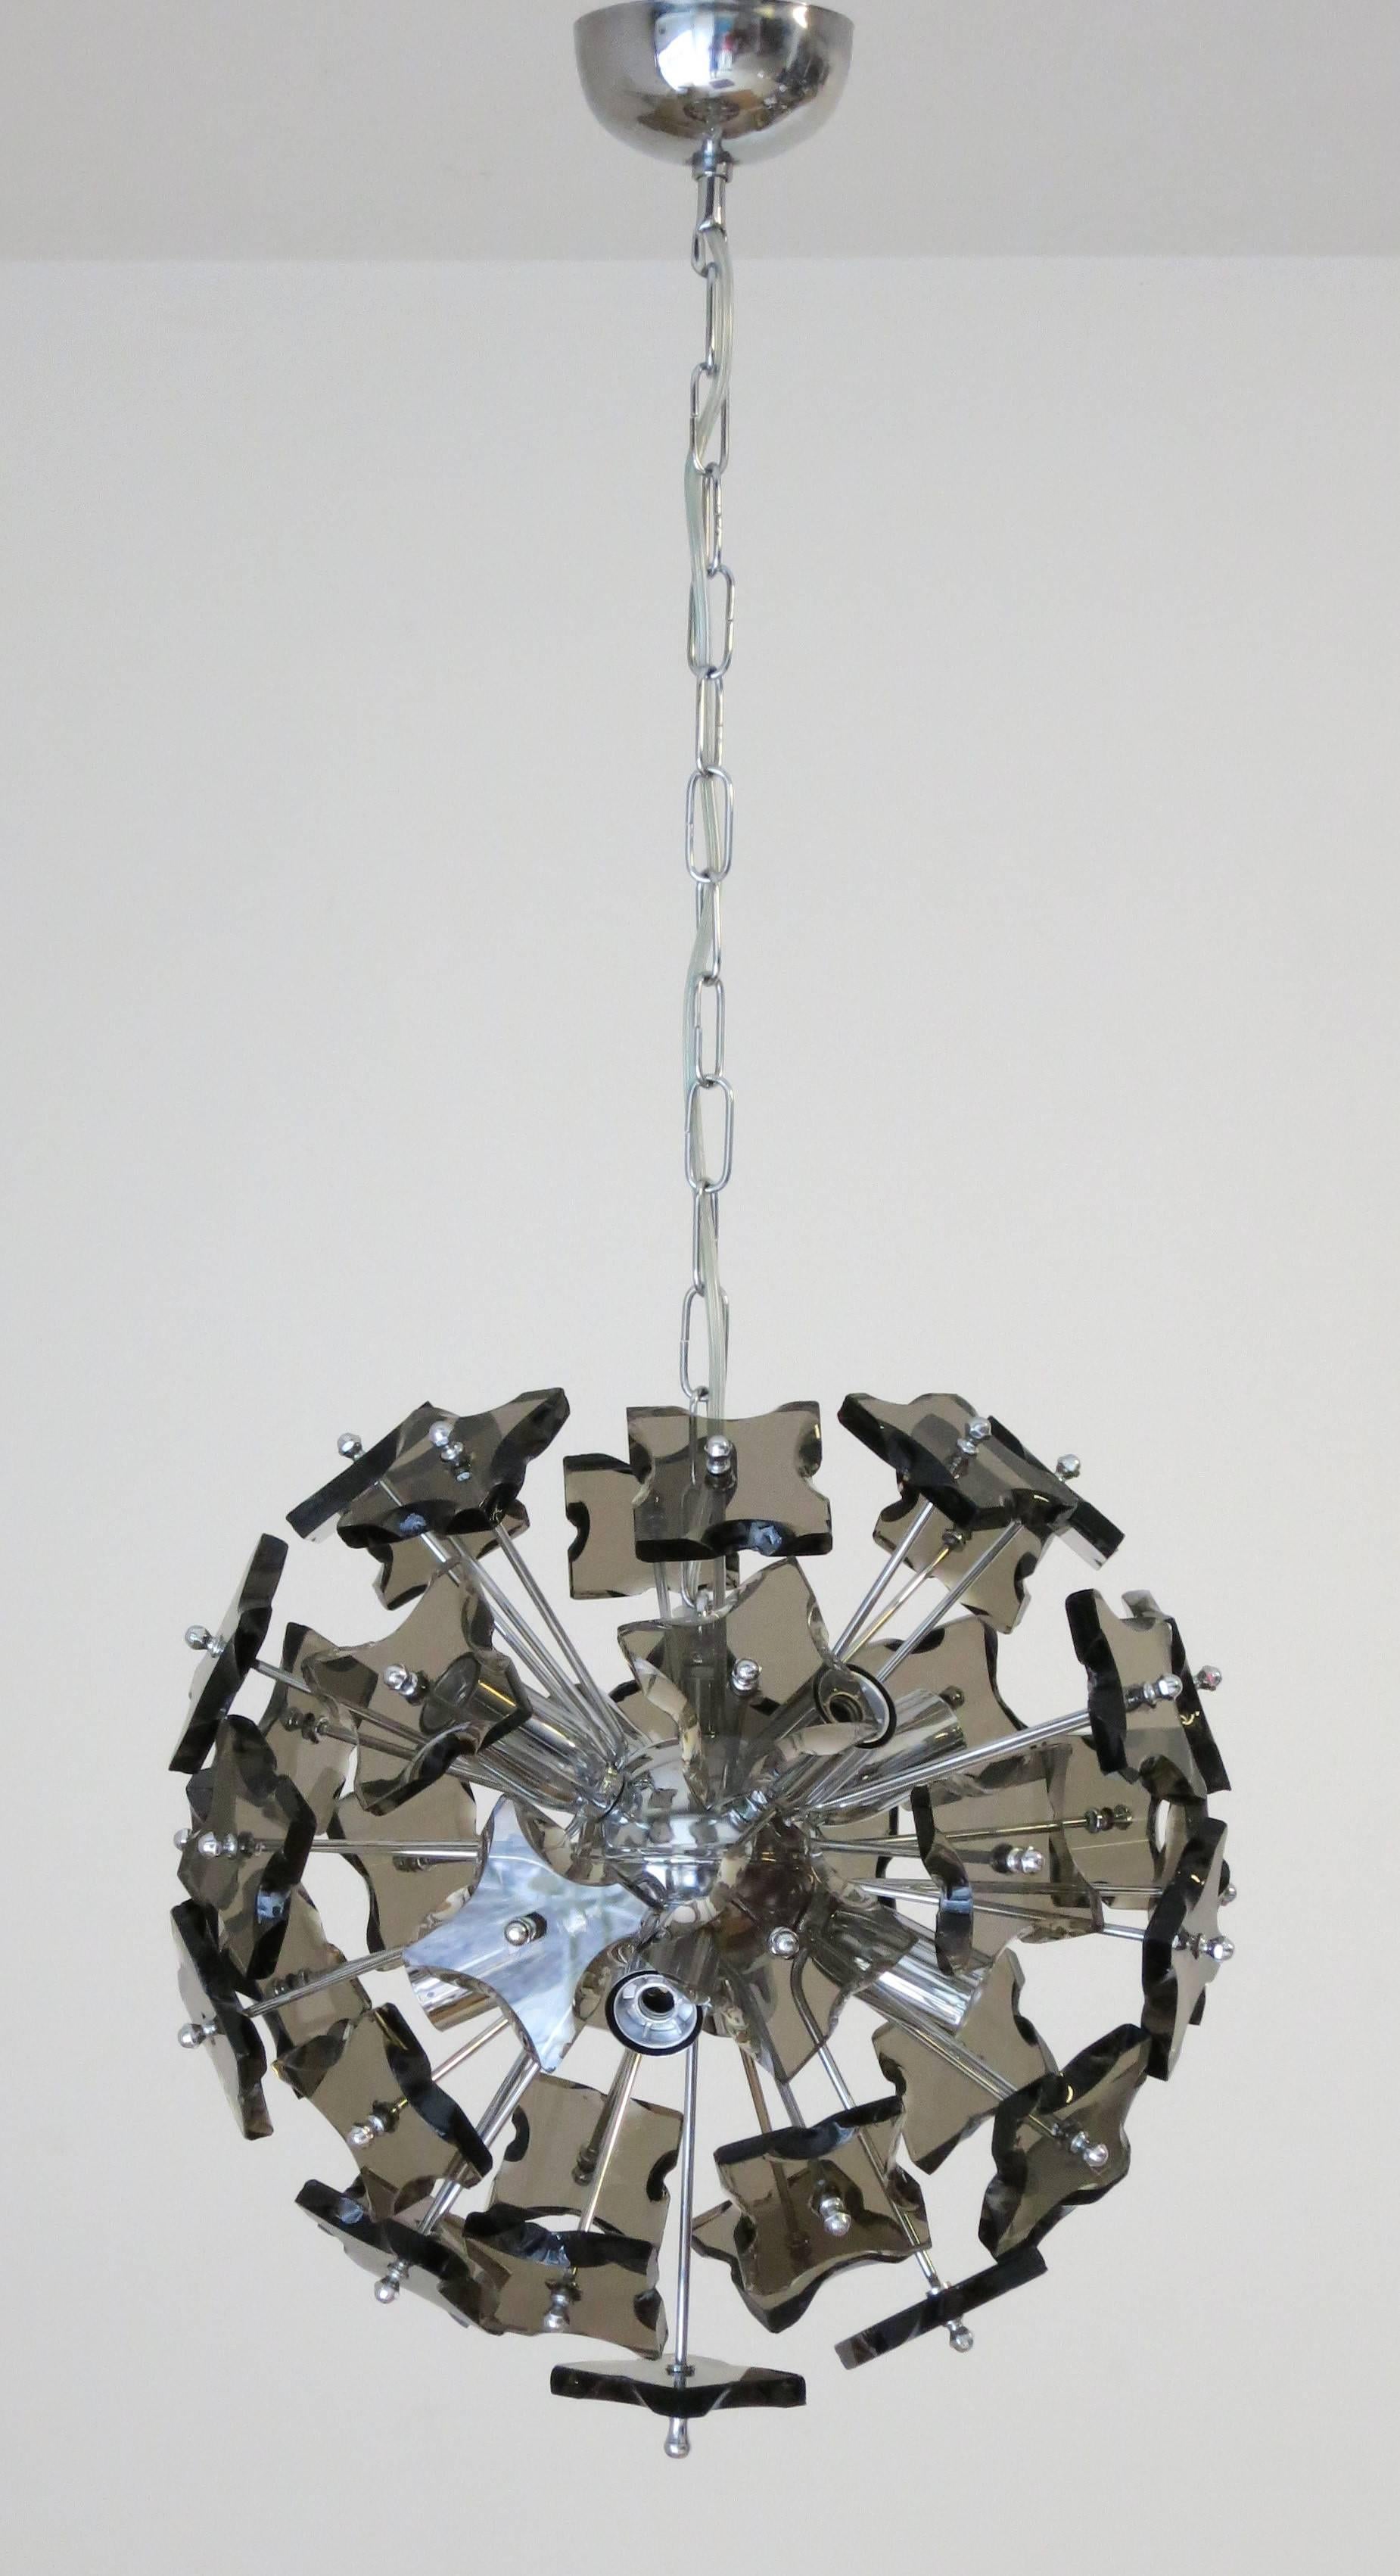 Original vintage chandelier with blown smoky Murano glasses and hand chipped edges, mounted on nickel plated metal frame / In the style of Fontana Arte / Made in Italy circa 1960’s
8 lights / E12 or E14 type / max 40W each
Diameter: 16 inches /